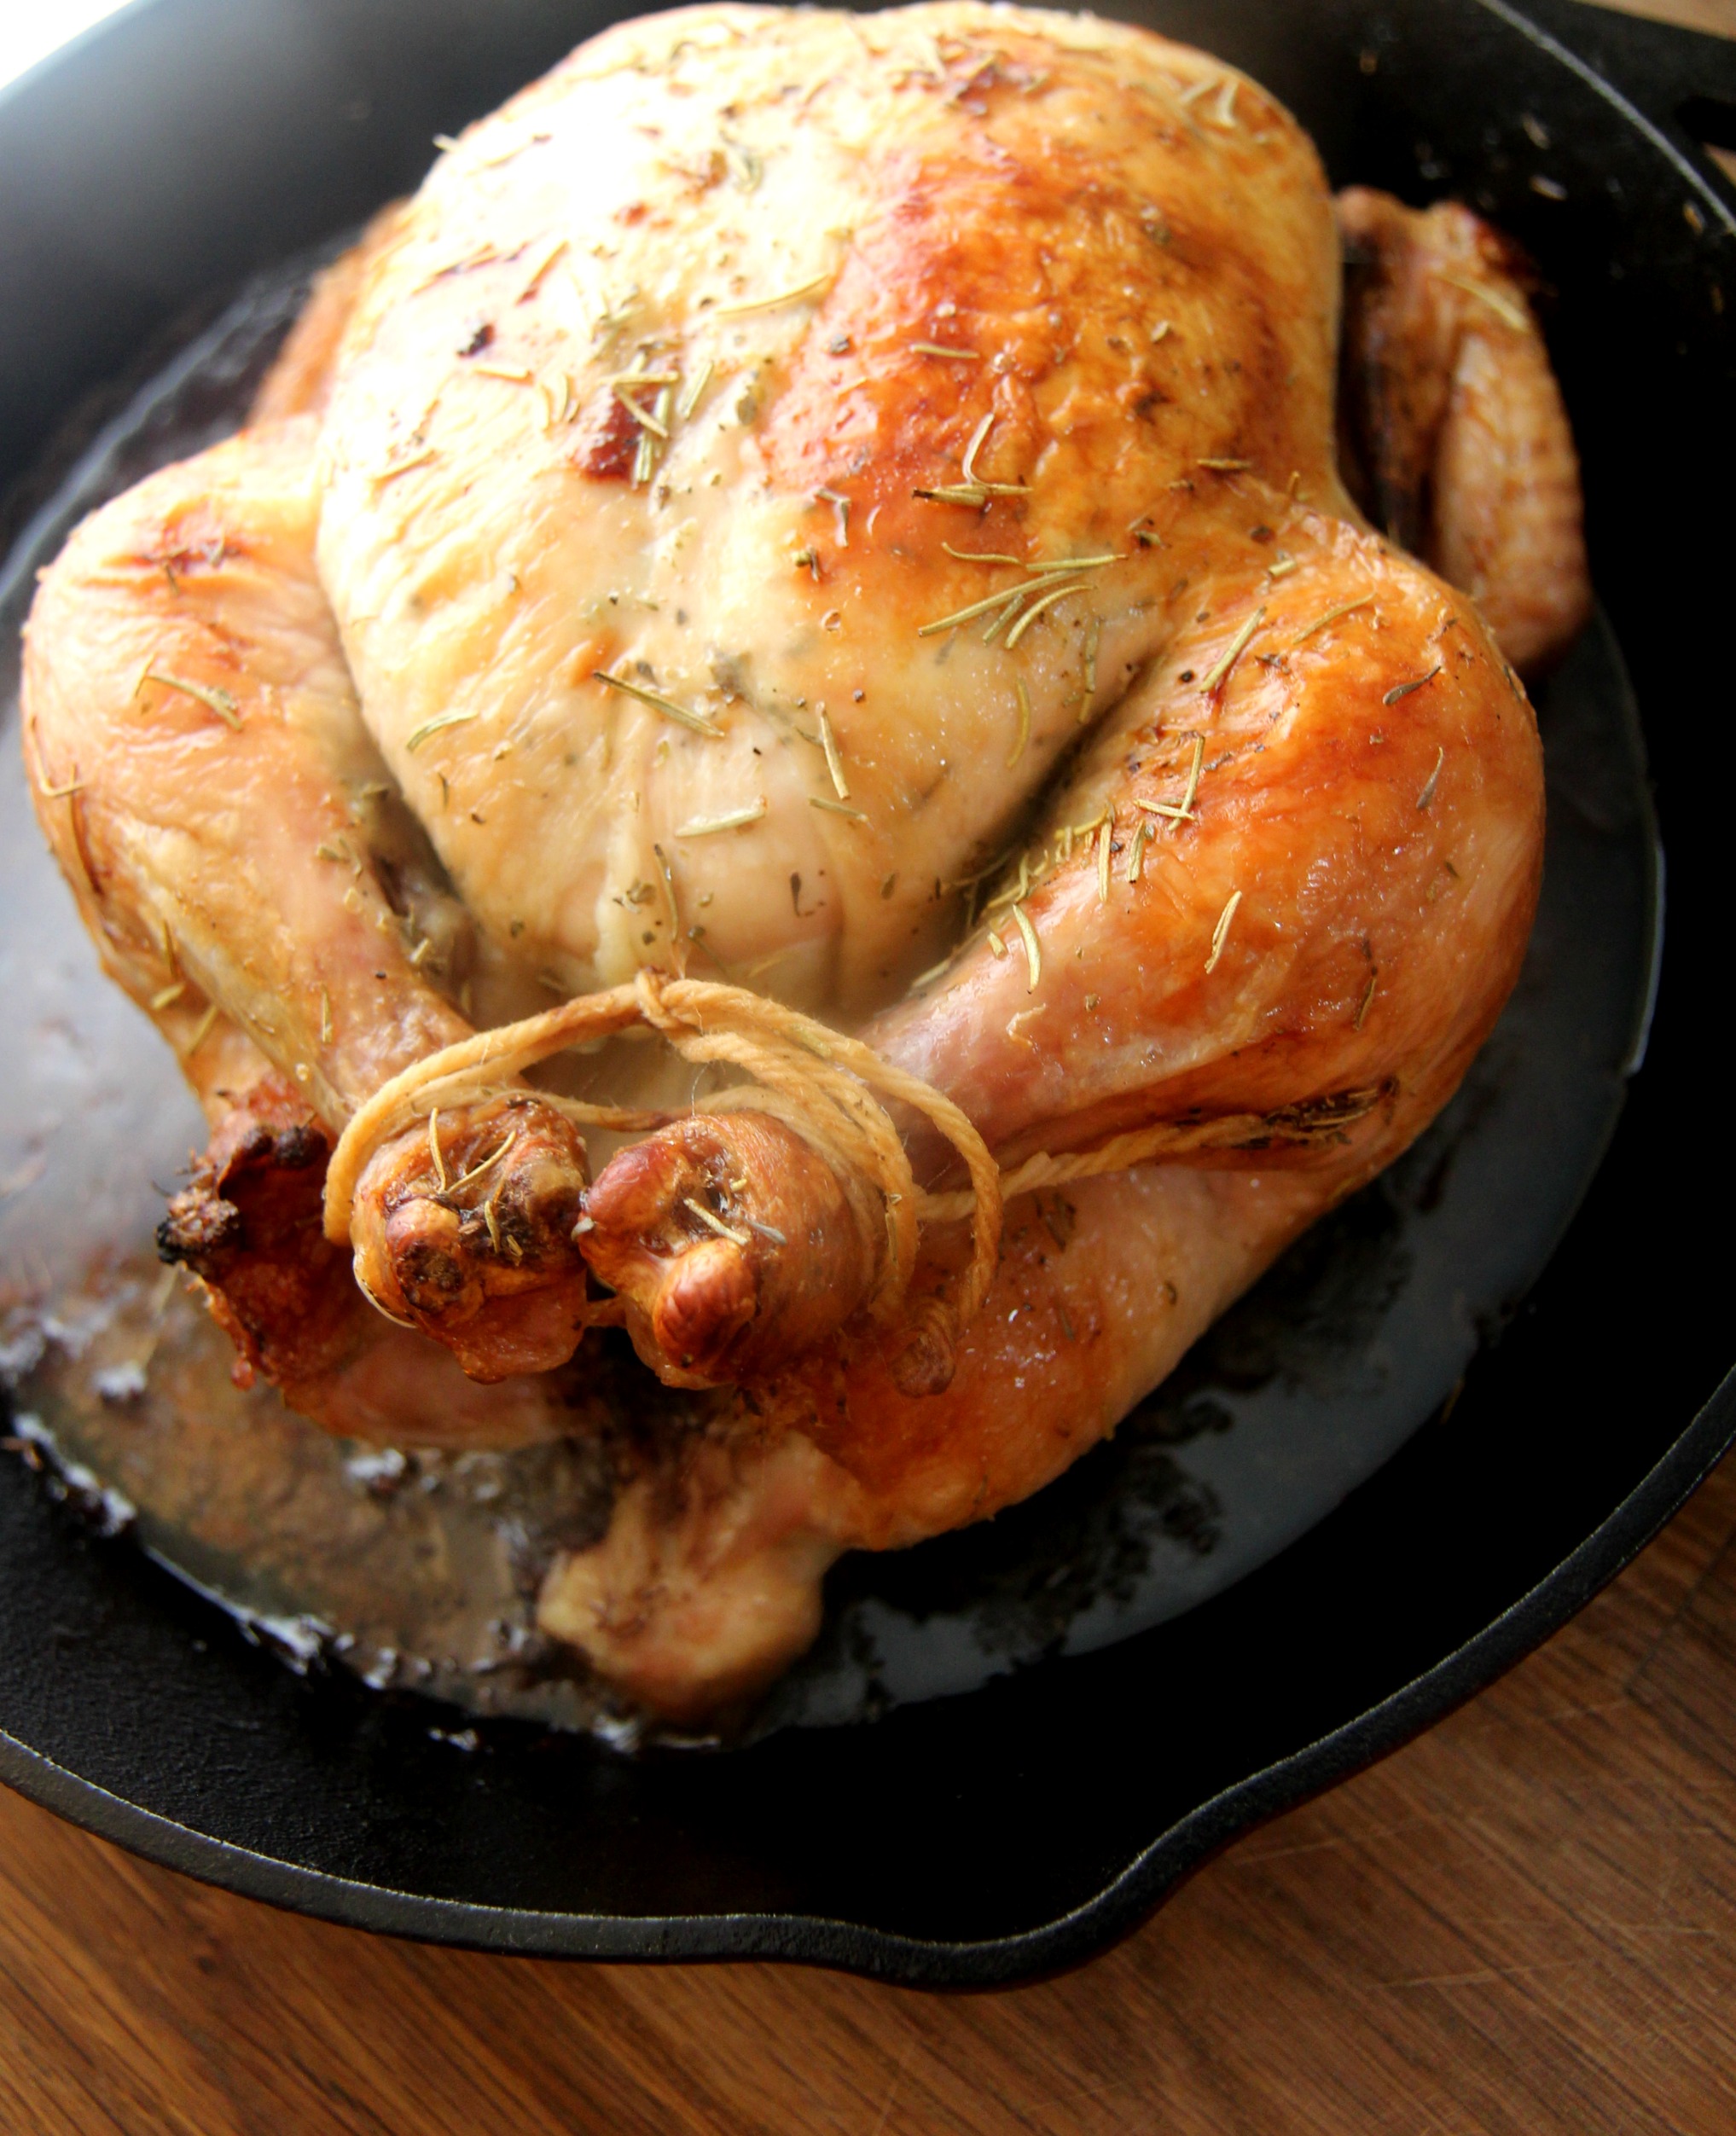 This juicy roasted chicken is smothered in herb butter and roasted to perfection